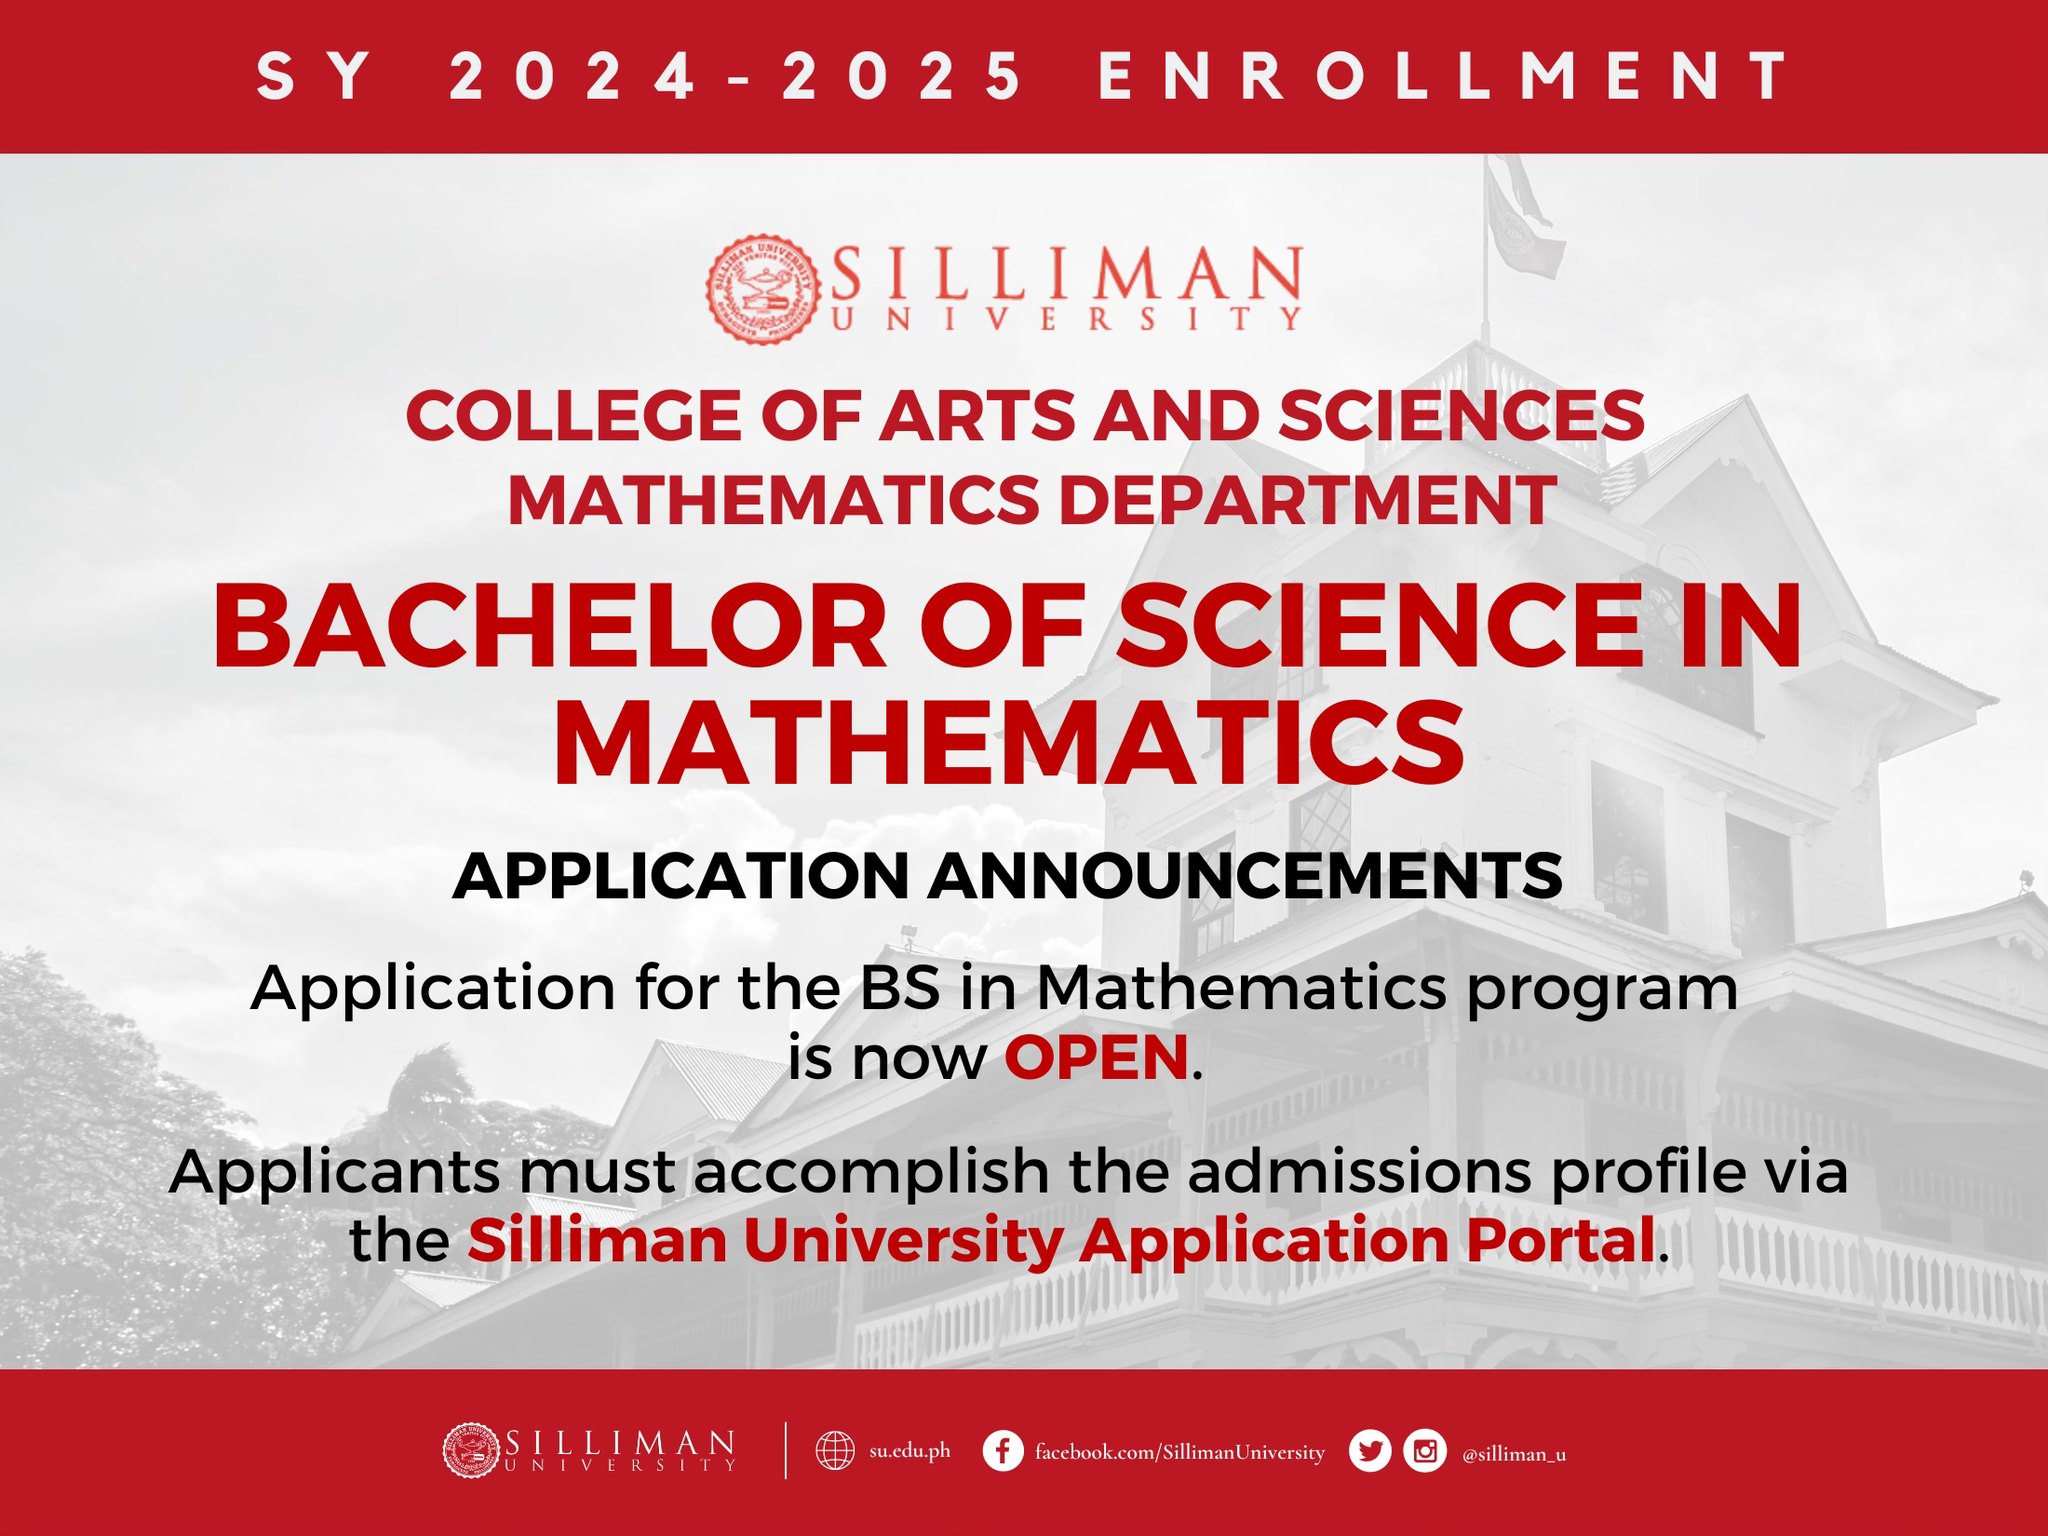 College of Arts and Sciences (CAS) – Mathematics Department is announcing its call for application to their Bachelor of Science in Mathematics for SY 2024-2025